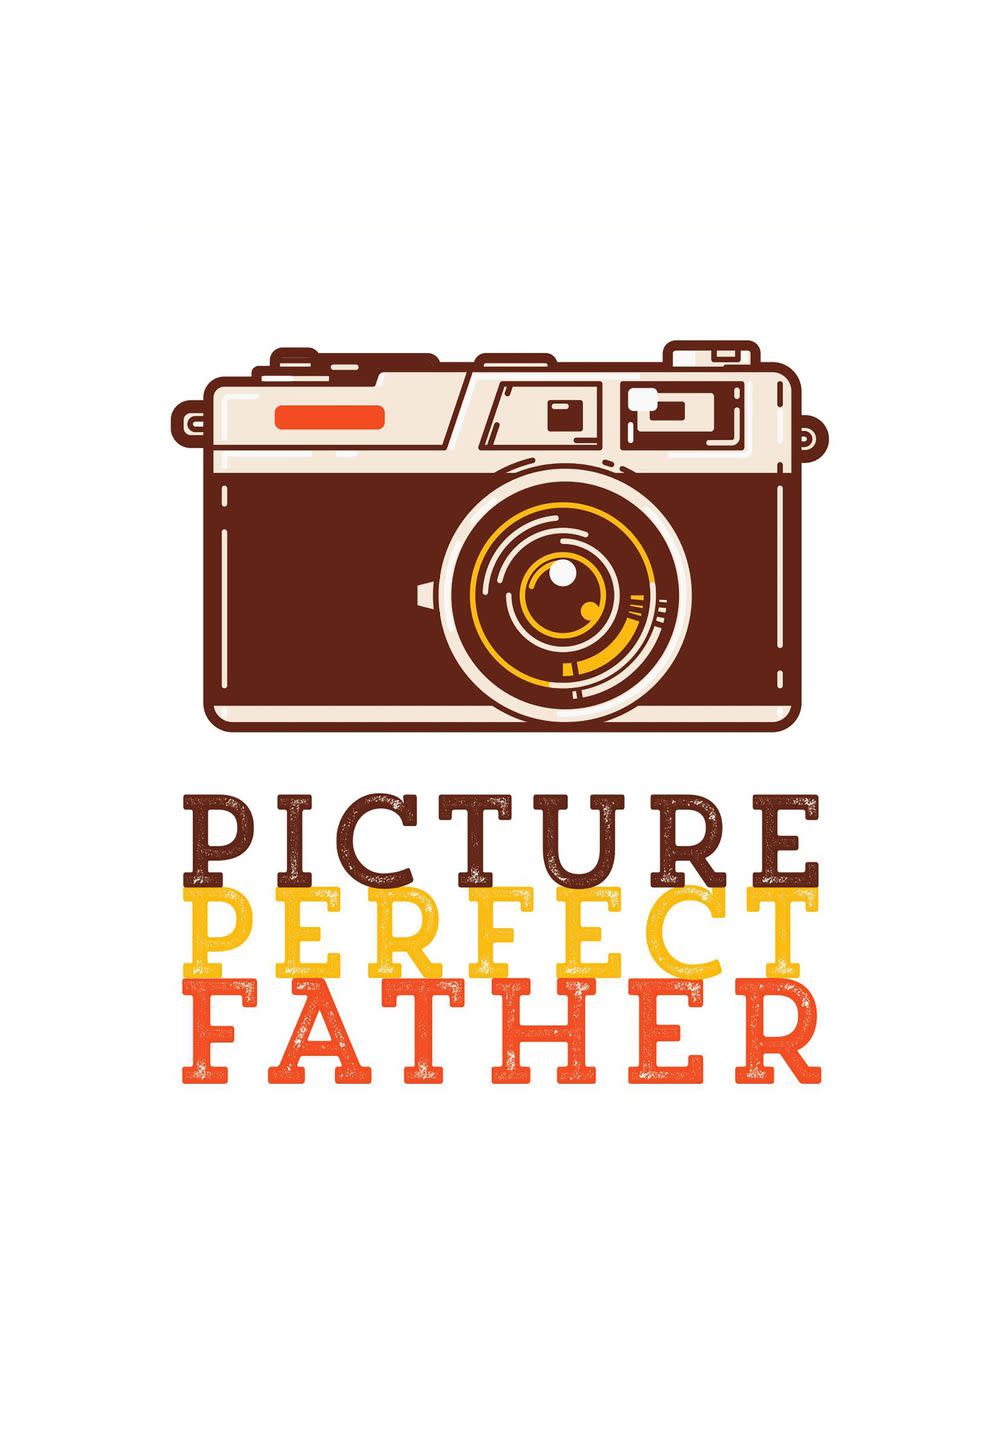 printable fathers day cards picture perfect father card